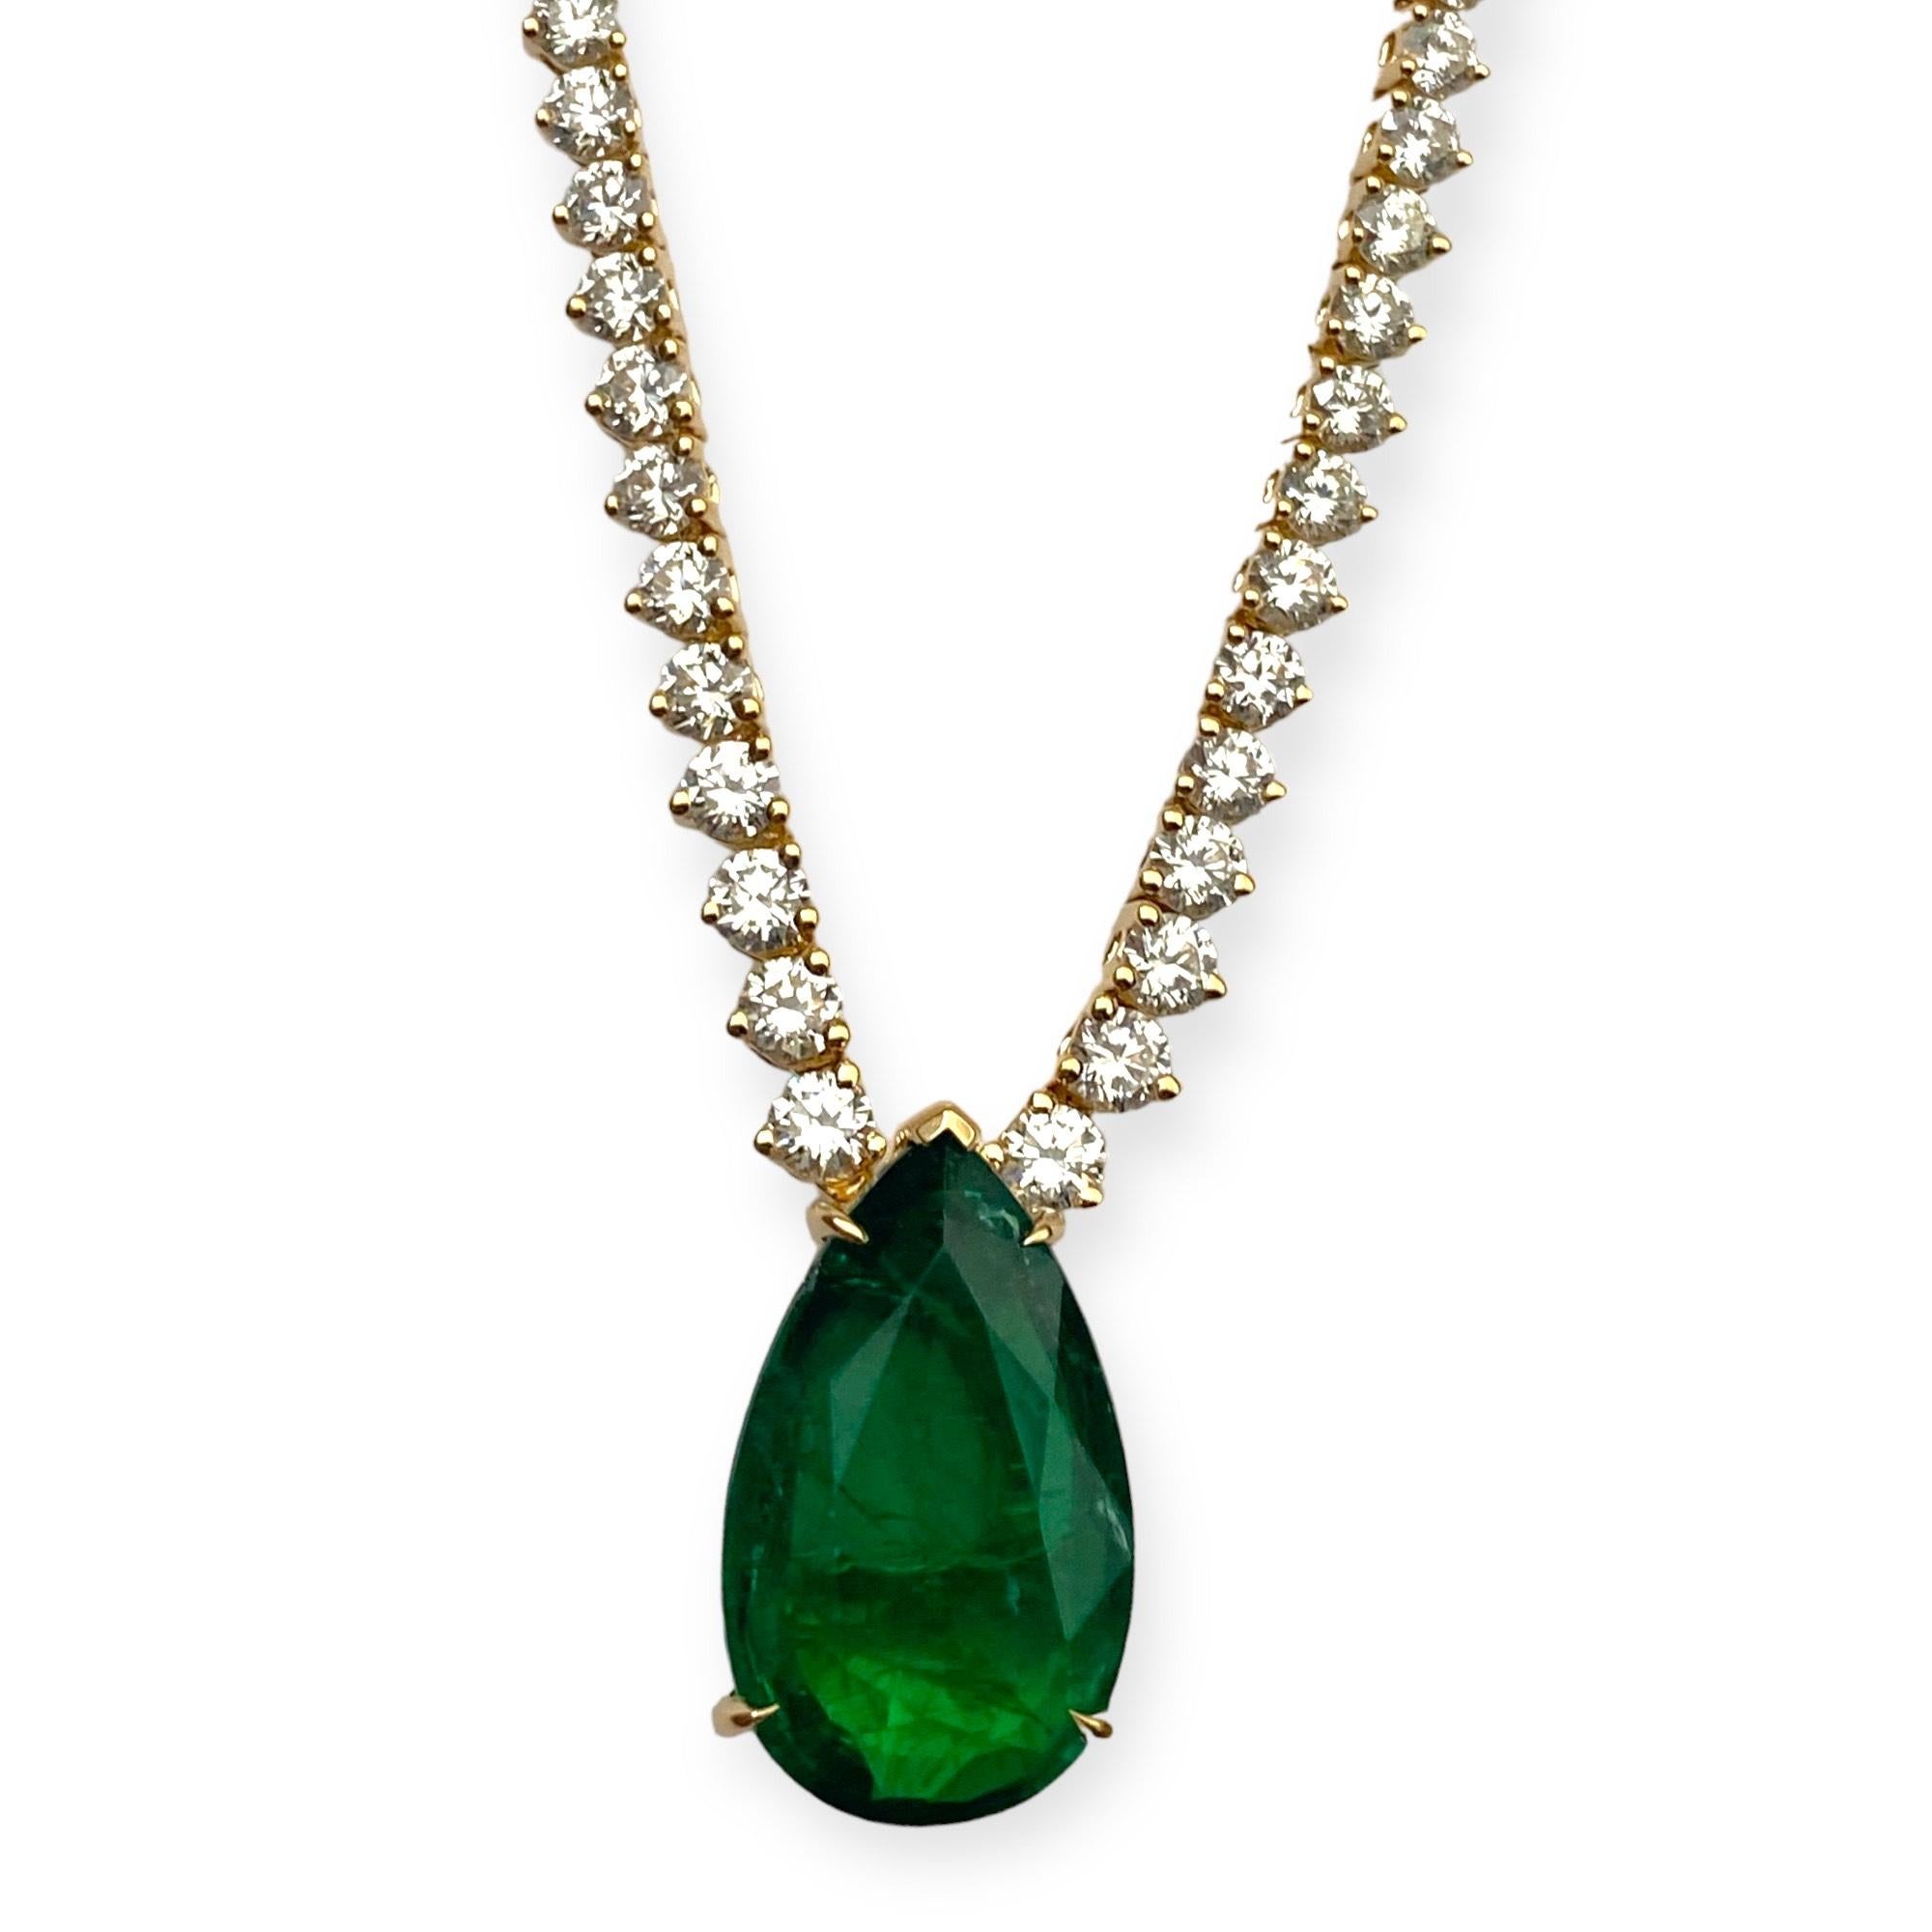 Women's or Men's Statement 7.3 ct Pear shaped Emerald and Graduated Diamond Necklace For Sale